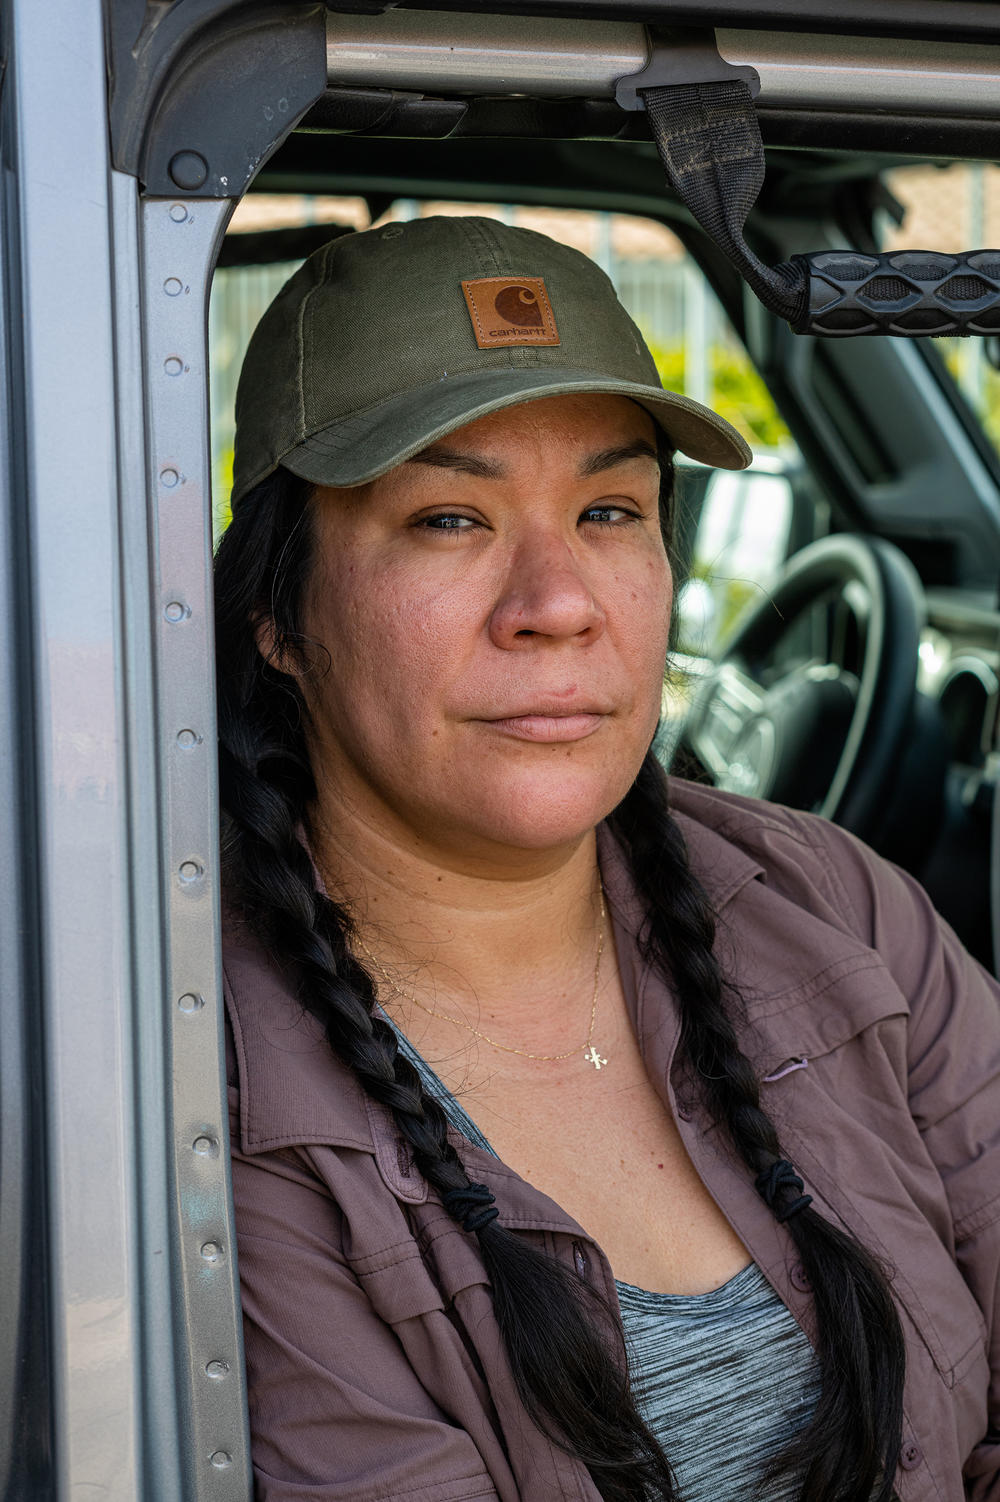 Jacqueline Arellano rests for a moment in her jeep in Yuma, Ariz. on a recent Sunday.